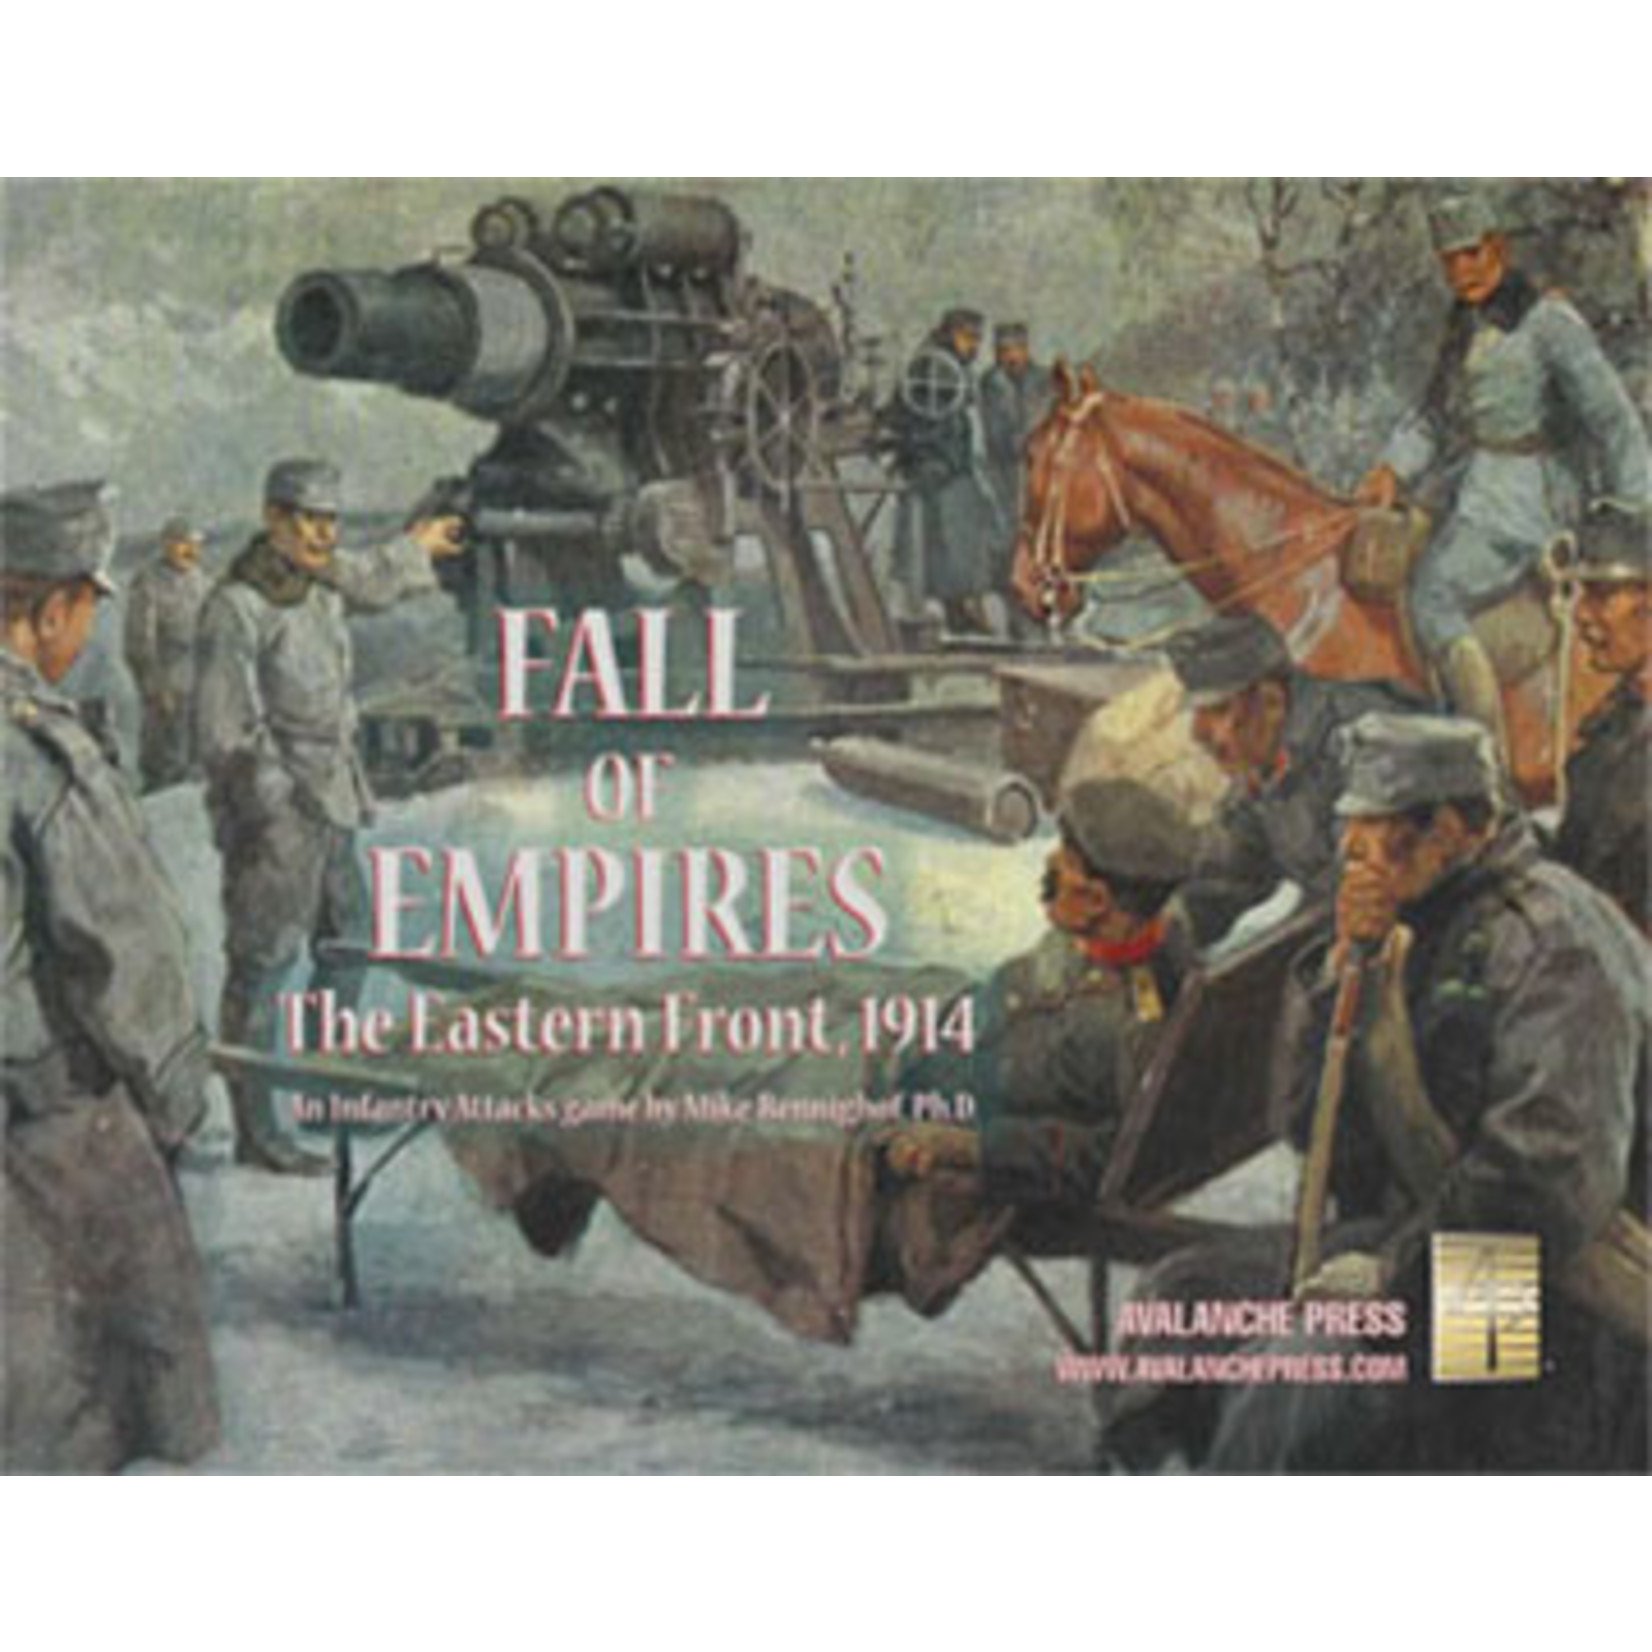 Avalanche Press Infantry Attacks Fall of Empires D